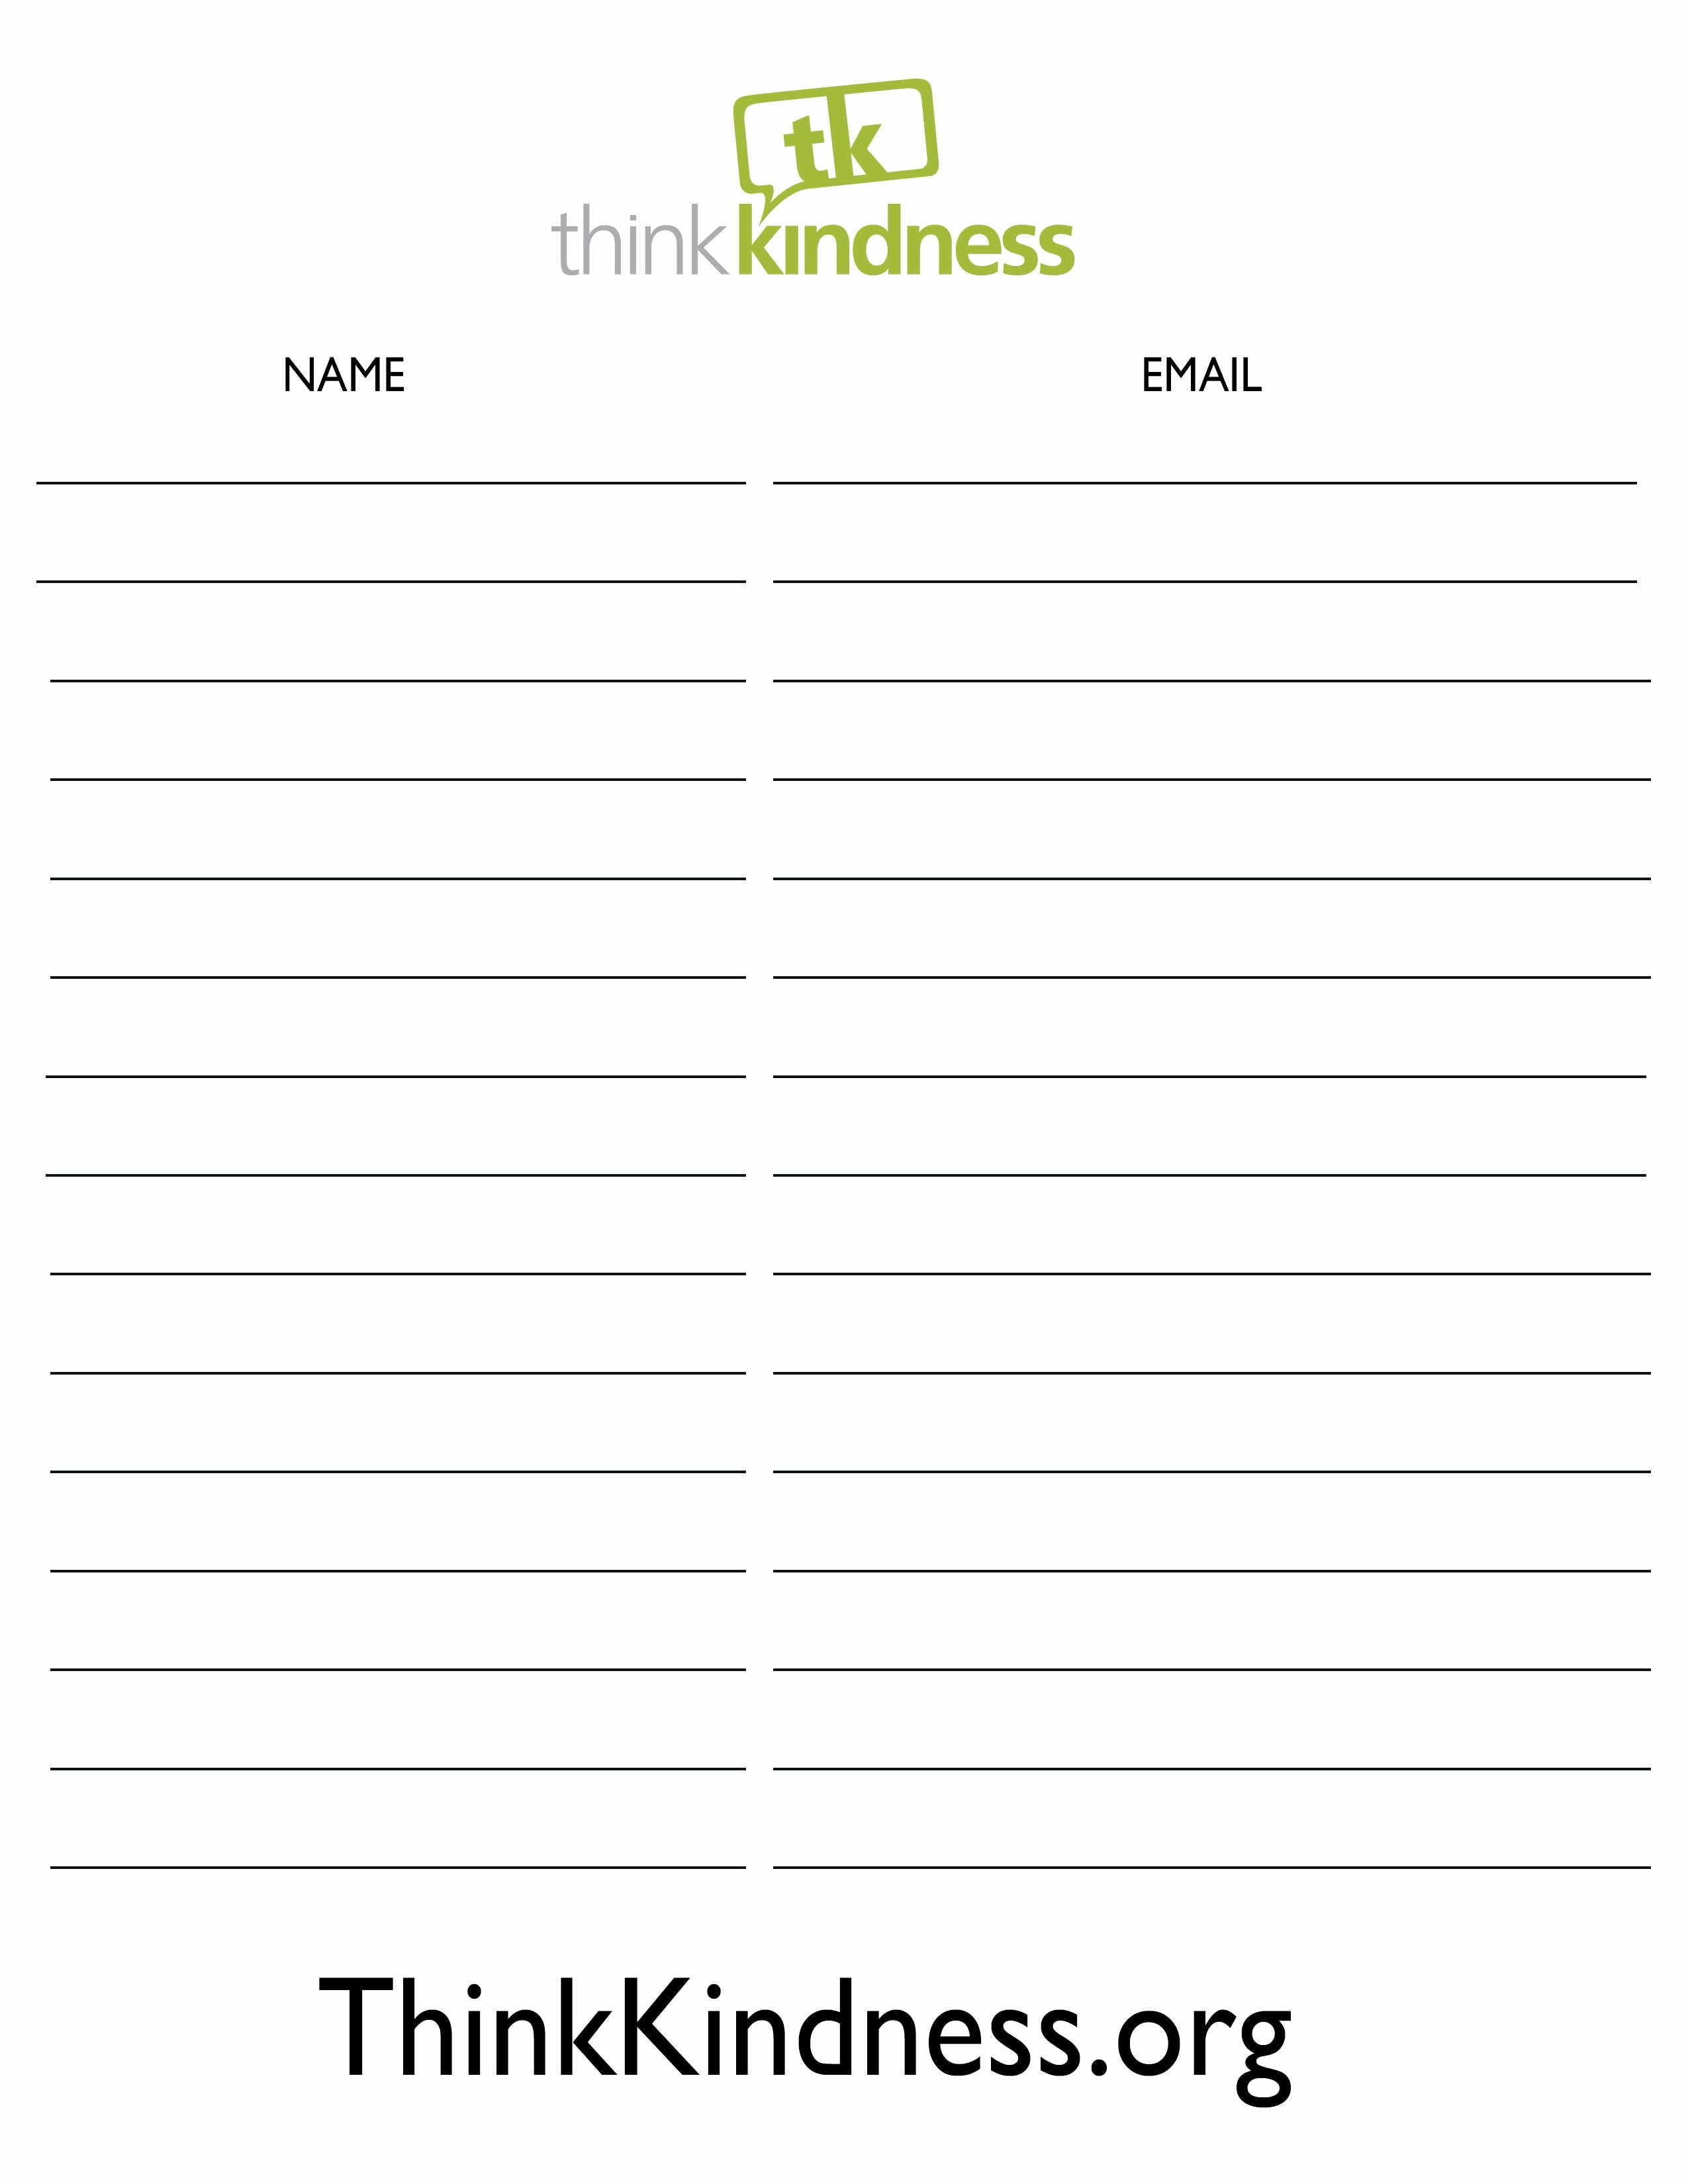 Newsletter Sign Up Template Unique Email List Template Newsletter Sign Up form Digital Pdf